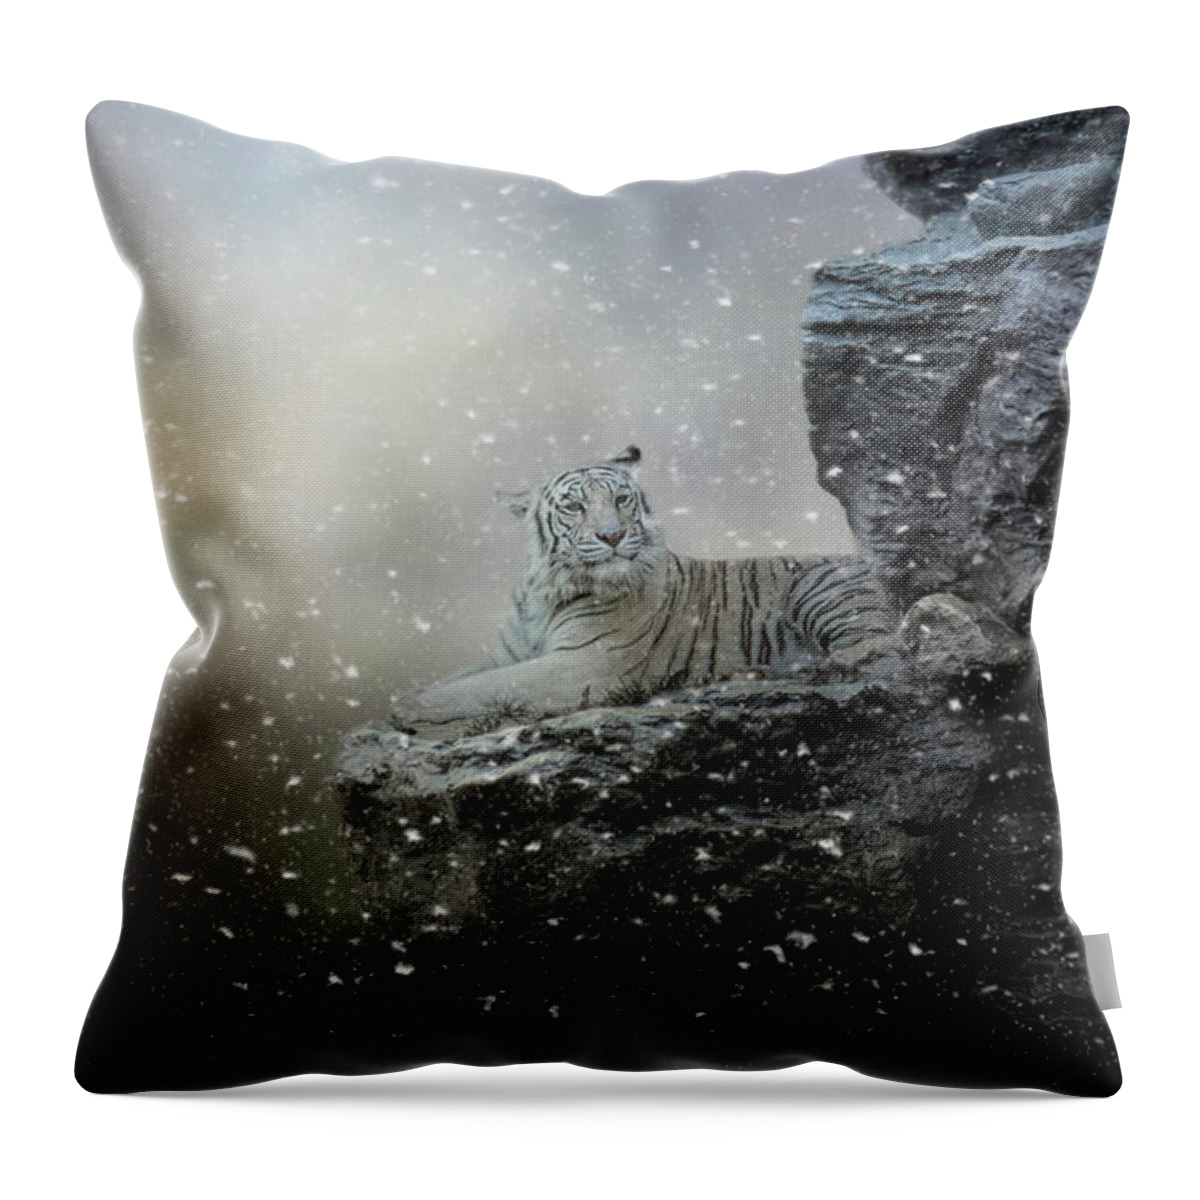 White Tiger Throw Pillow featuring the photograph A Time Of Rest by Jai Johnson